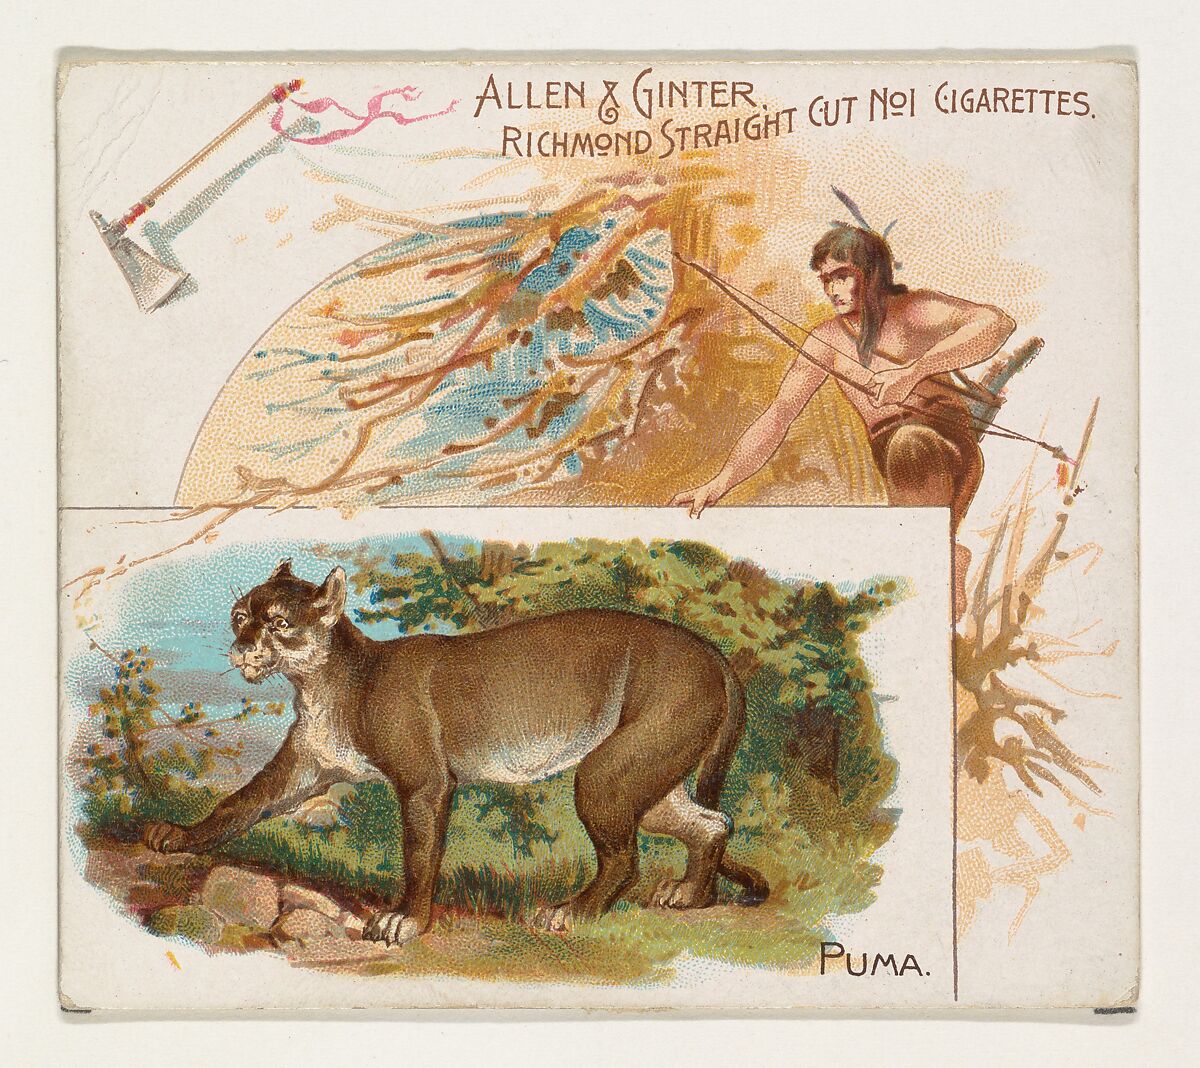 Puma, from Quadrupeds series (N41) for Allen & Ginter Cigarettes, Issued by Allen &amp; Ginter (American, Richmond, Virginia), Commercial color lithograph 